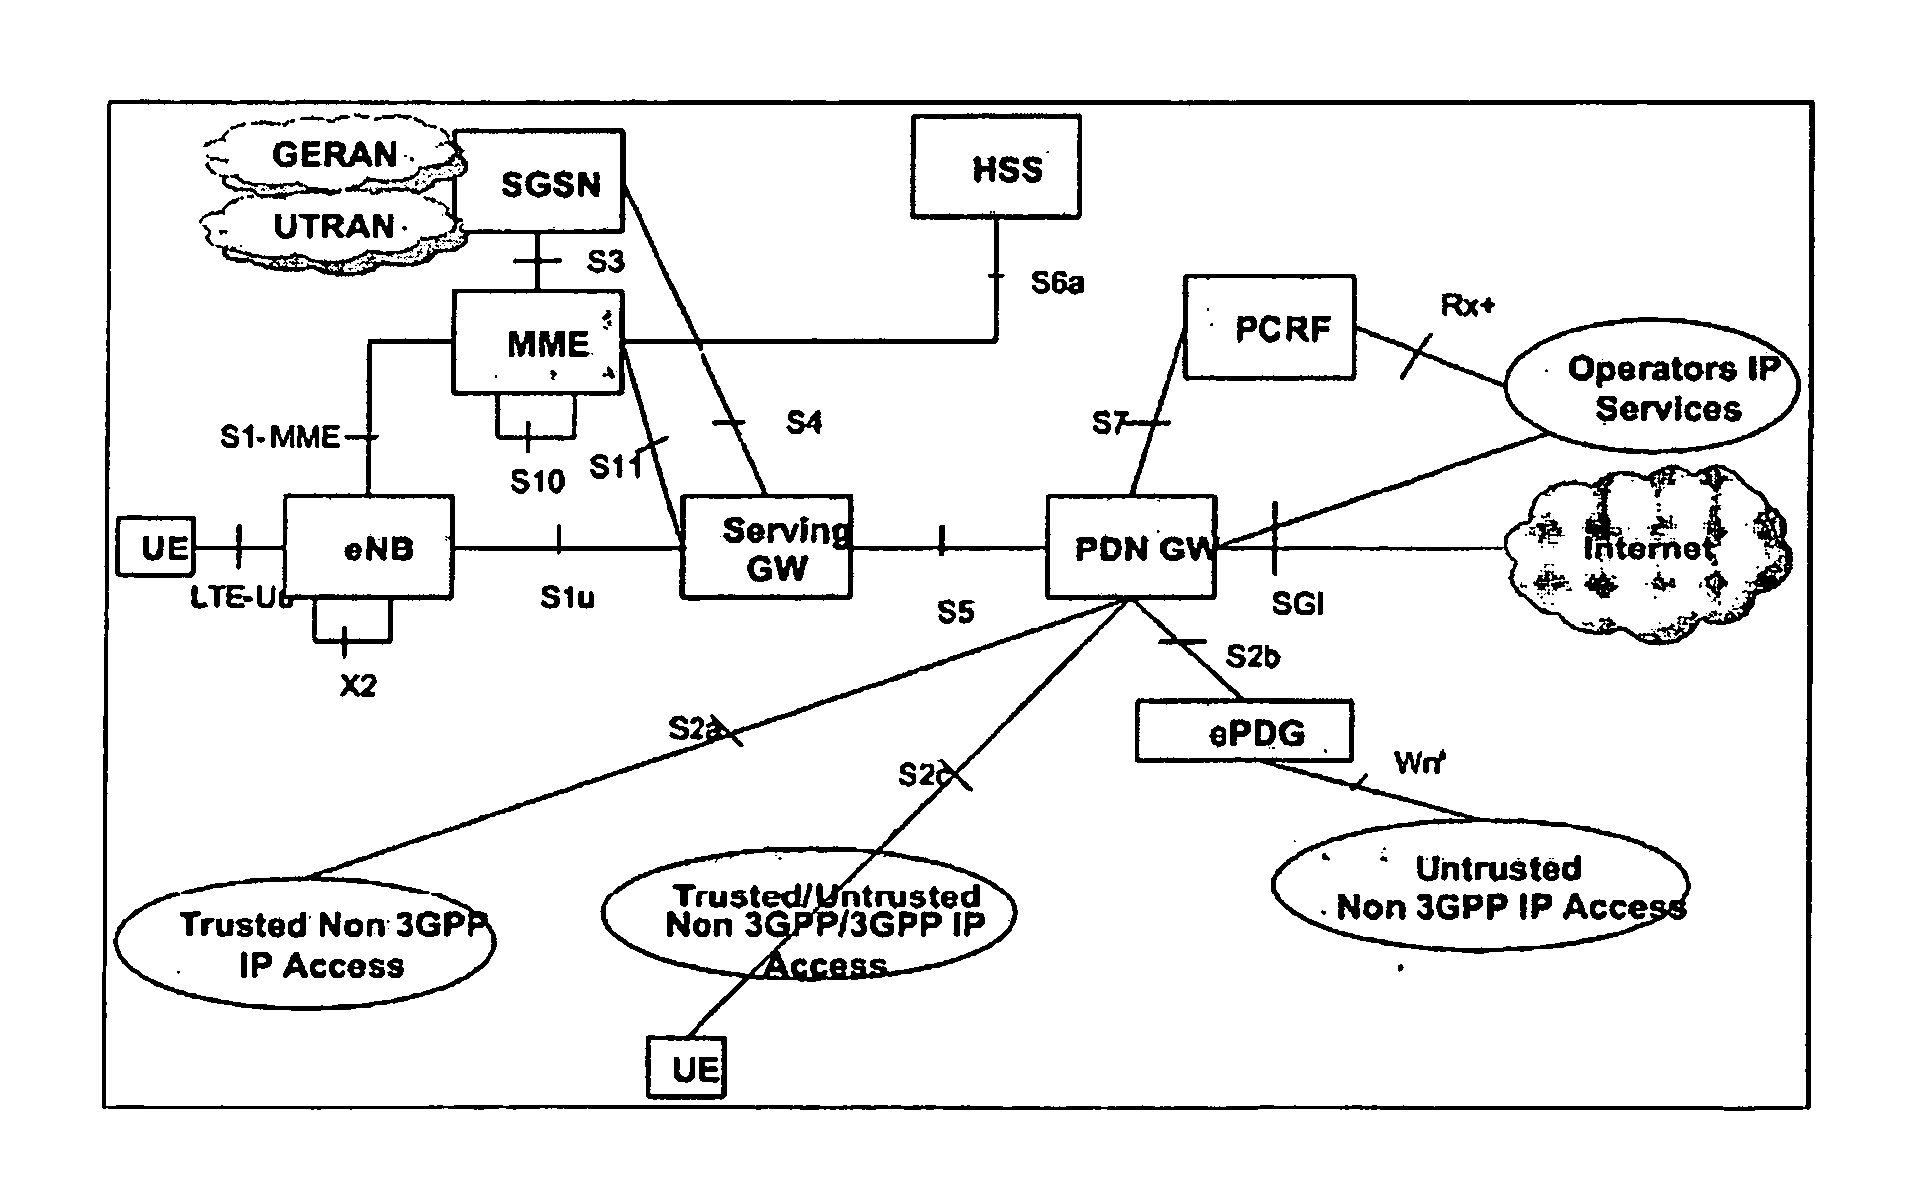 Soft-Buffer Management of a Re-Transmission Protocol for Unicast and Multicast Transmissions